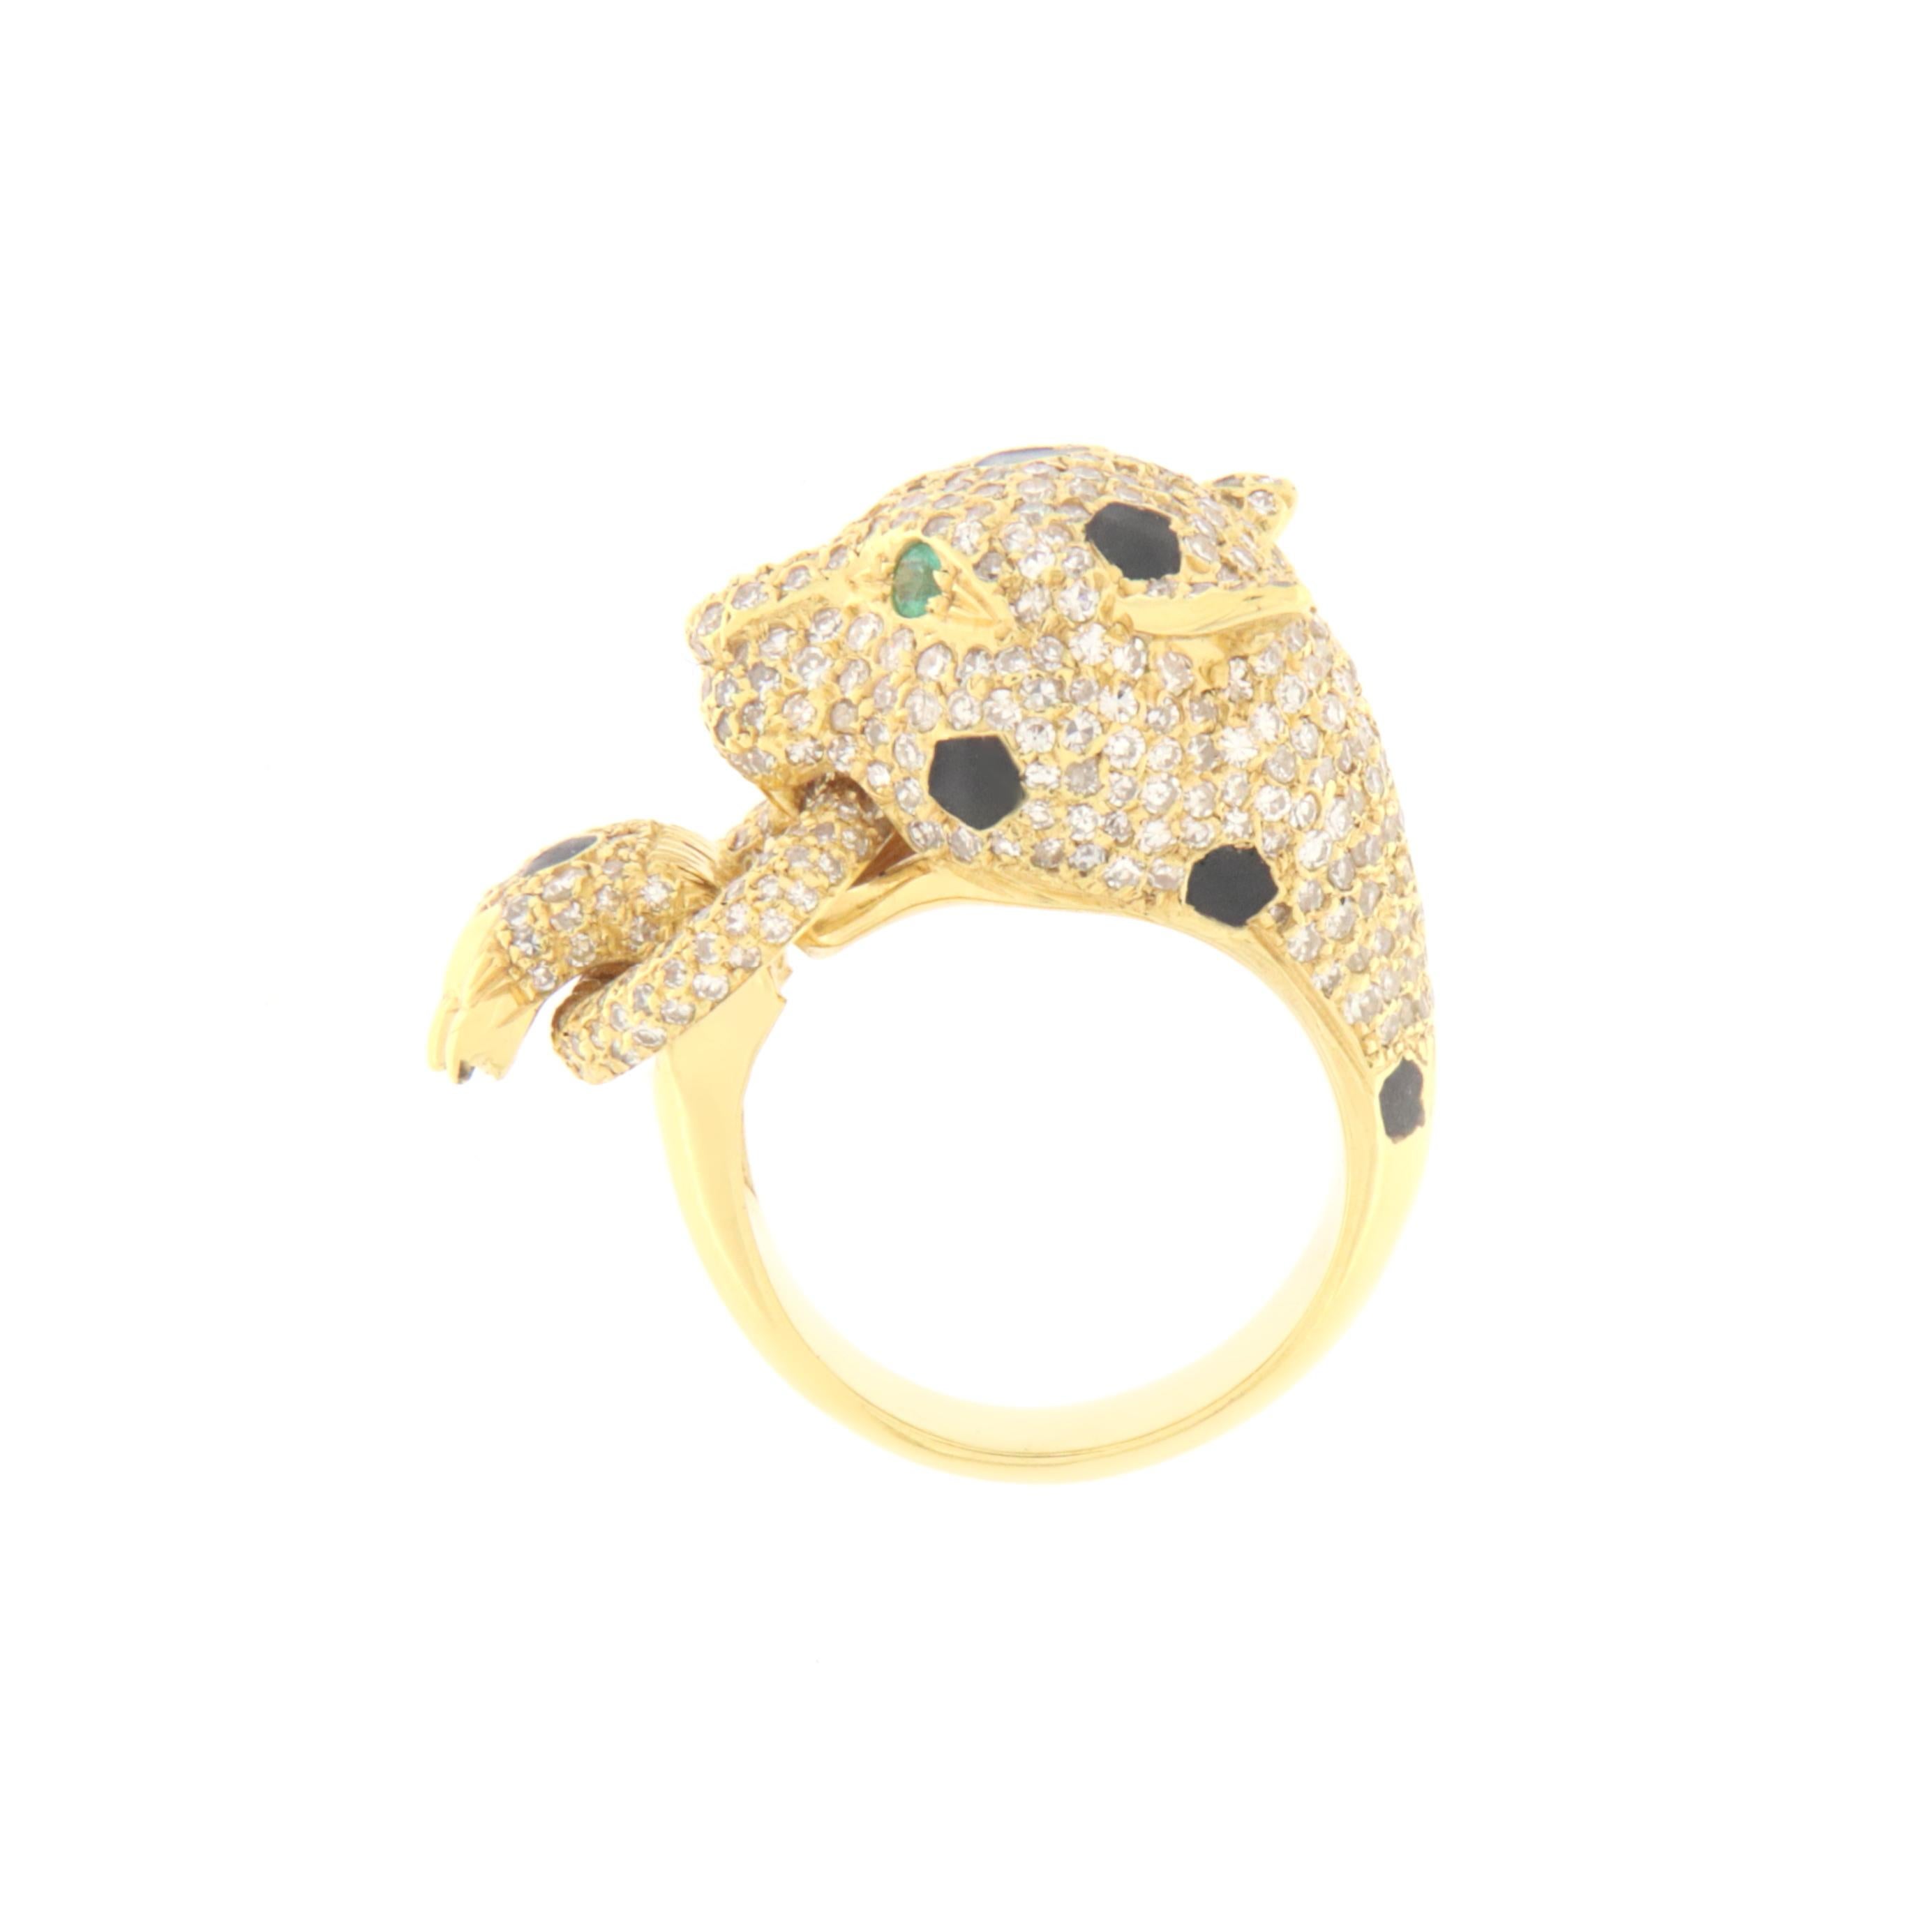 Gorgeous cougar ring in 18 karat yellow gold studded with diamonds and with two emeralds in the eyes there are also shades of black enamel, this fabulous ring was created by our artisans in southern Italy.

Ring total weight 15 grams
Diamonds weight